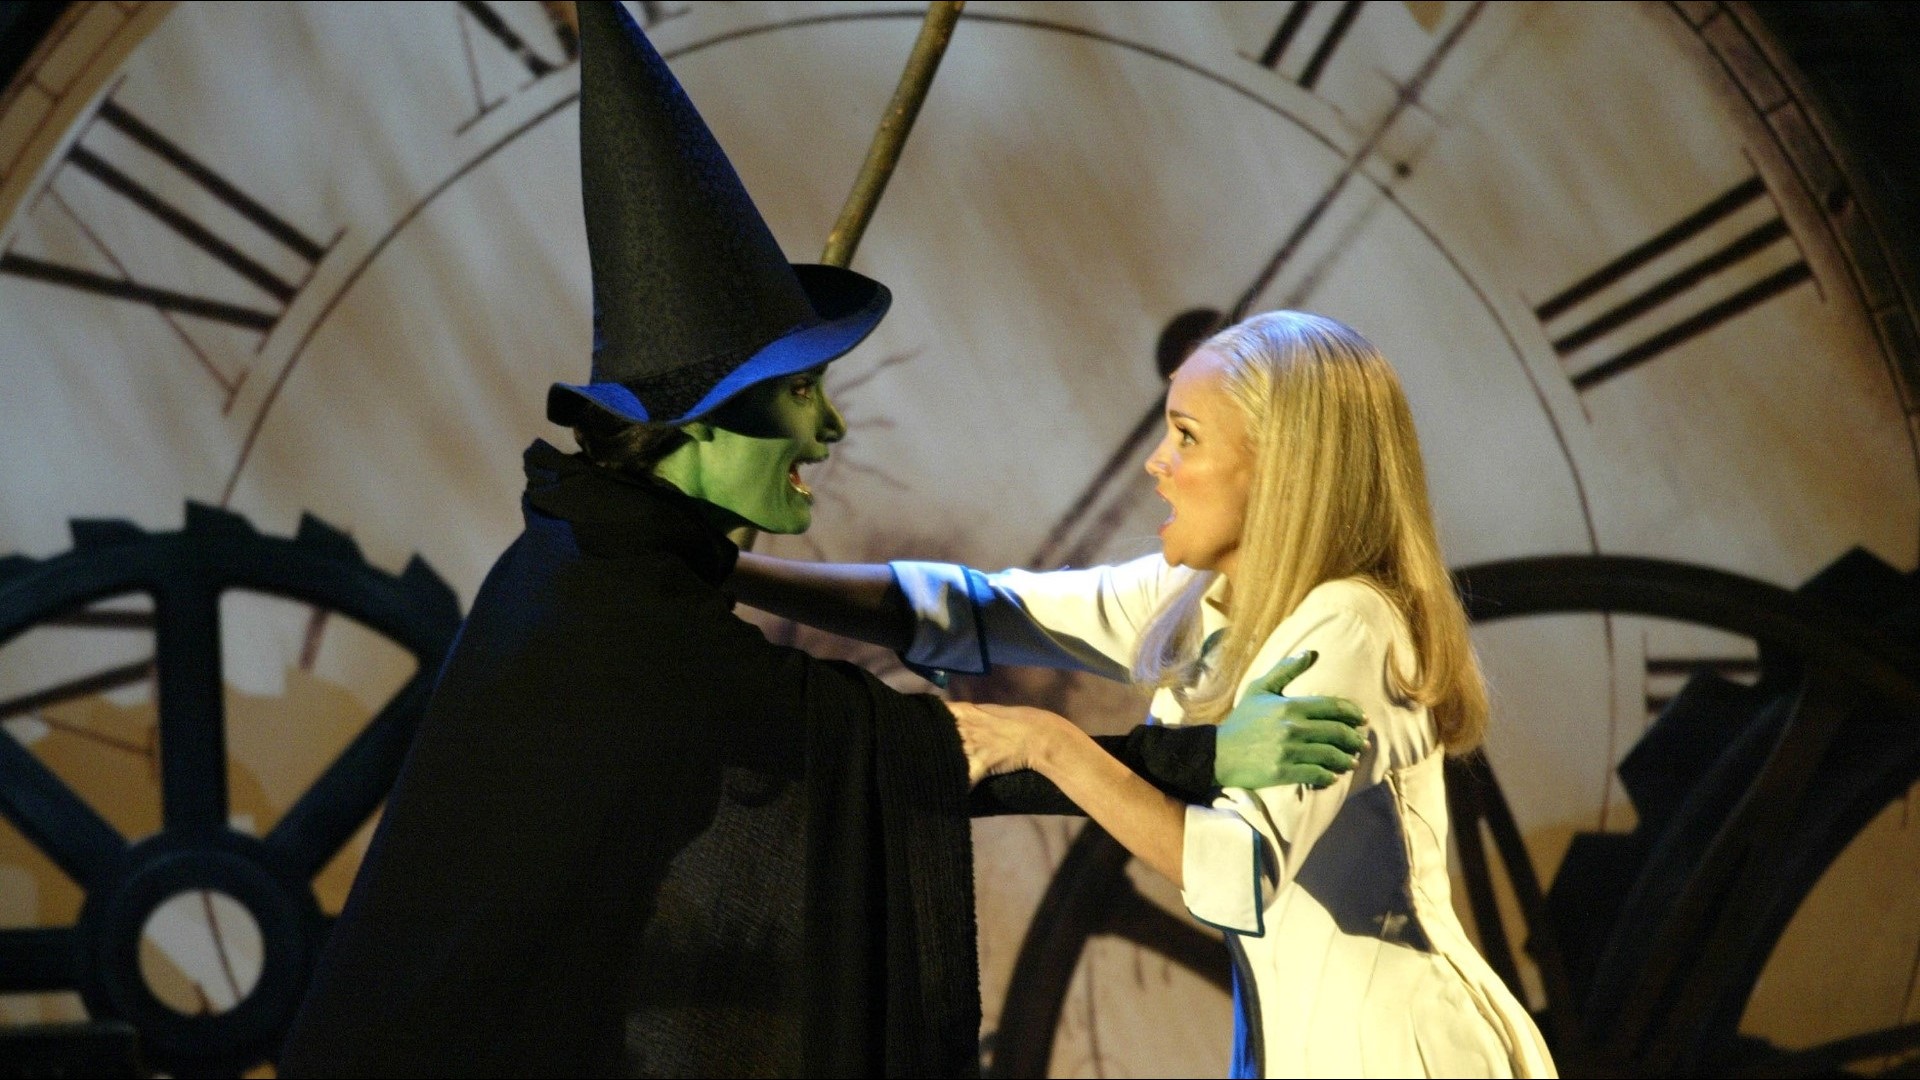 A taste of Broadway officially back in the Queen city. Wicked officially opening up tonight at the Blumenthal performing arts center.